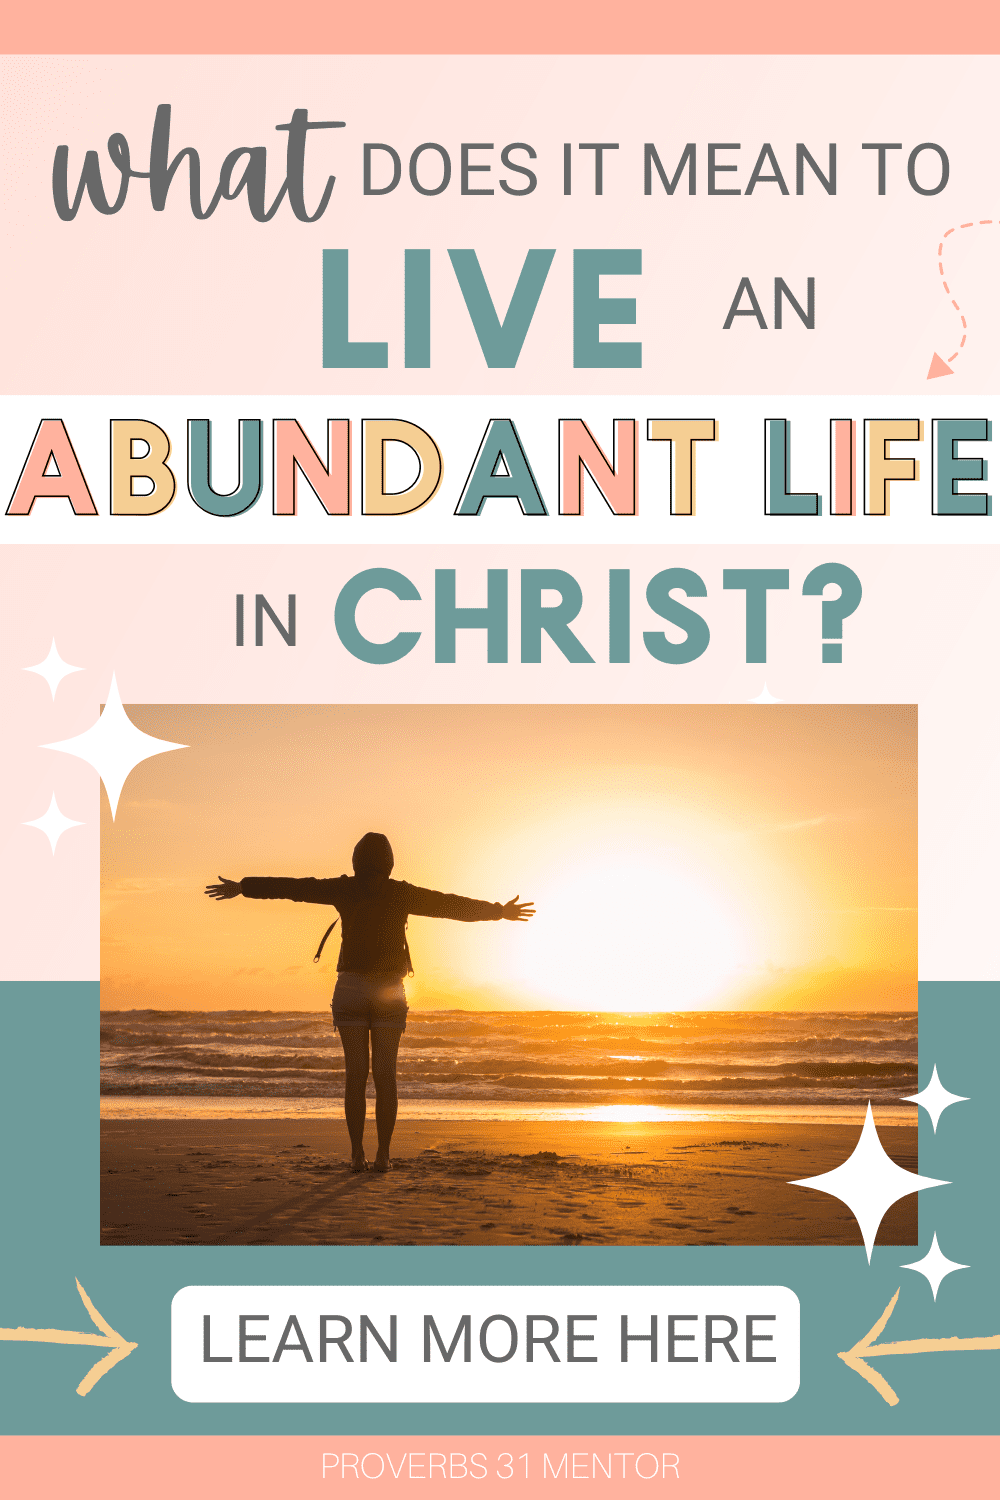 What Does it Mean to Live an Abundant Life in Christ? picture- woman standing on beach at sunset with arms towards heaven